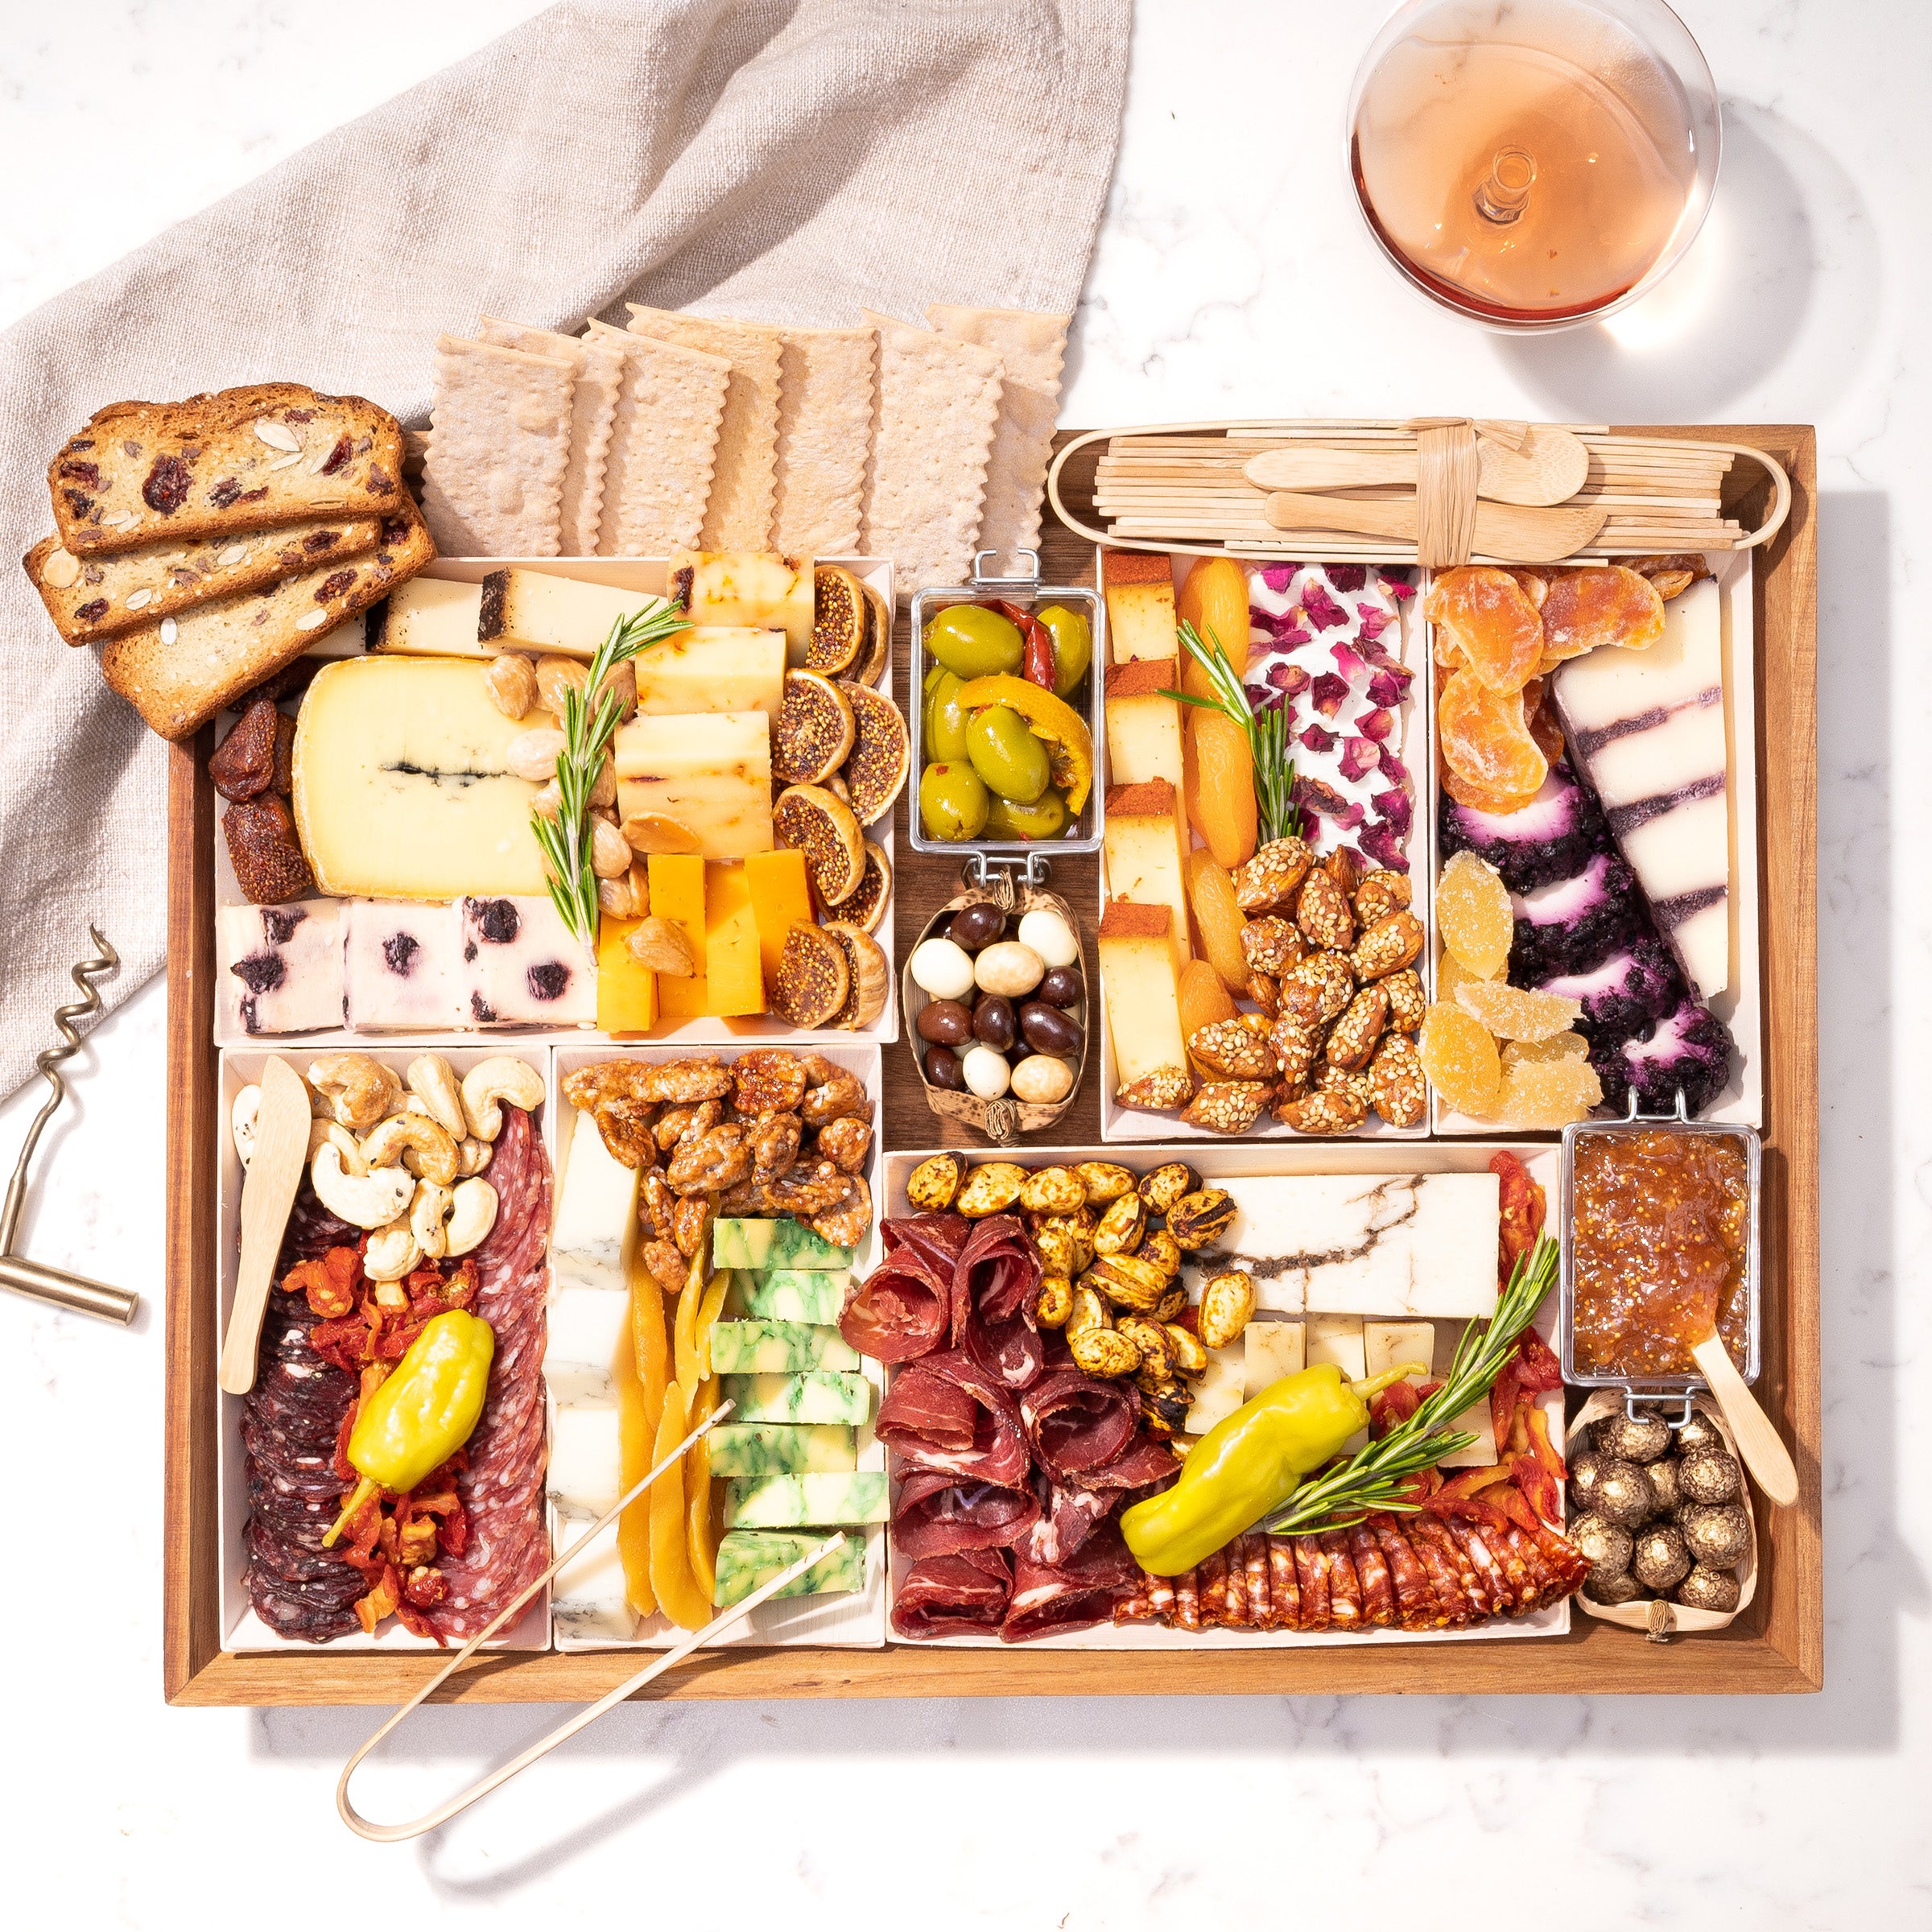 The Grand Fully-Assembled Artisan Cheese & Charcuterie Grazing Board